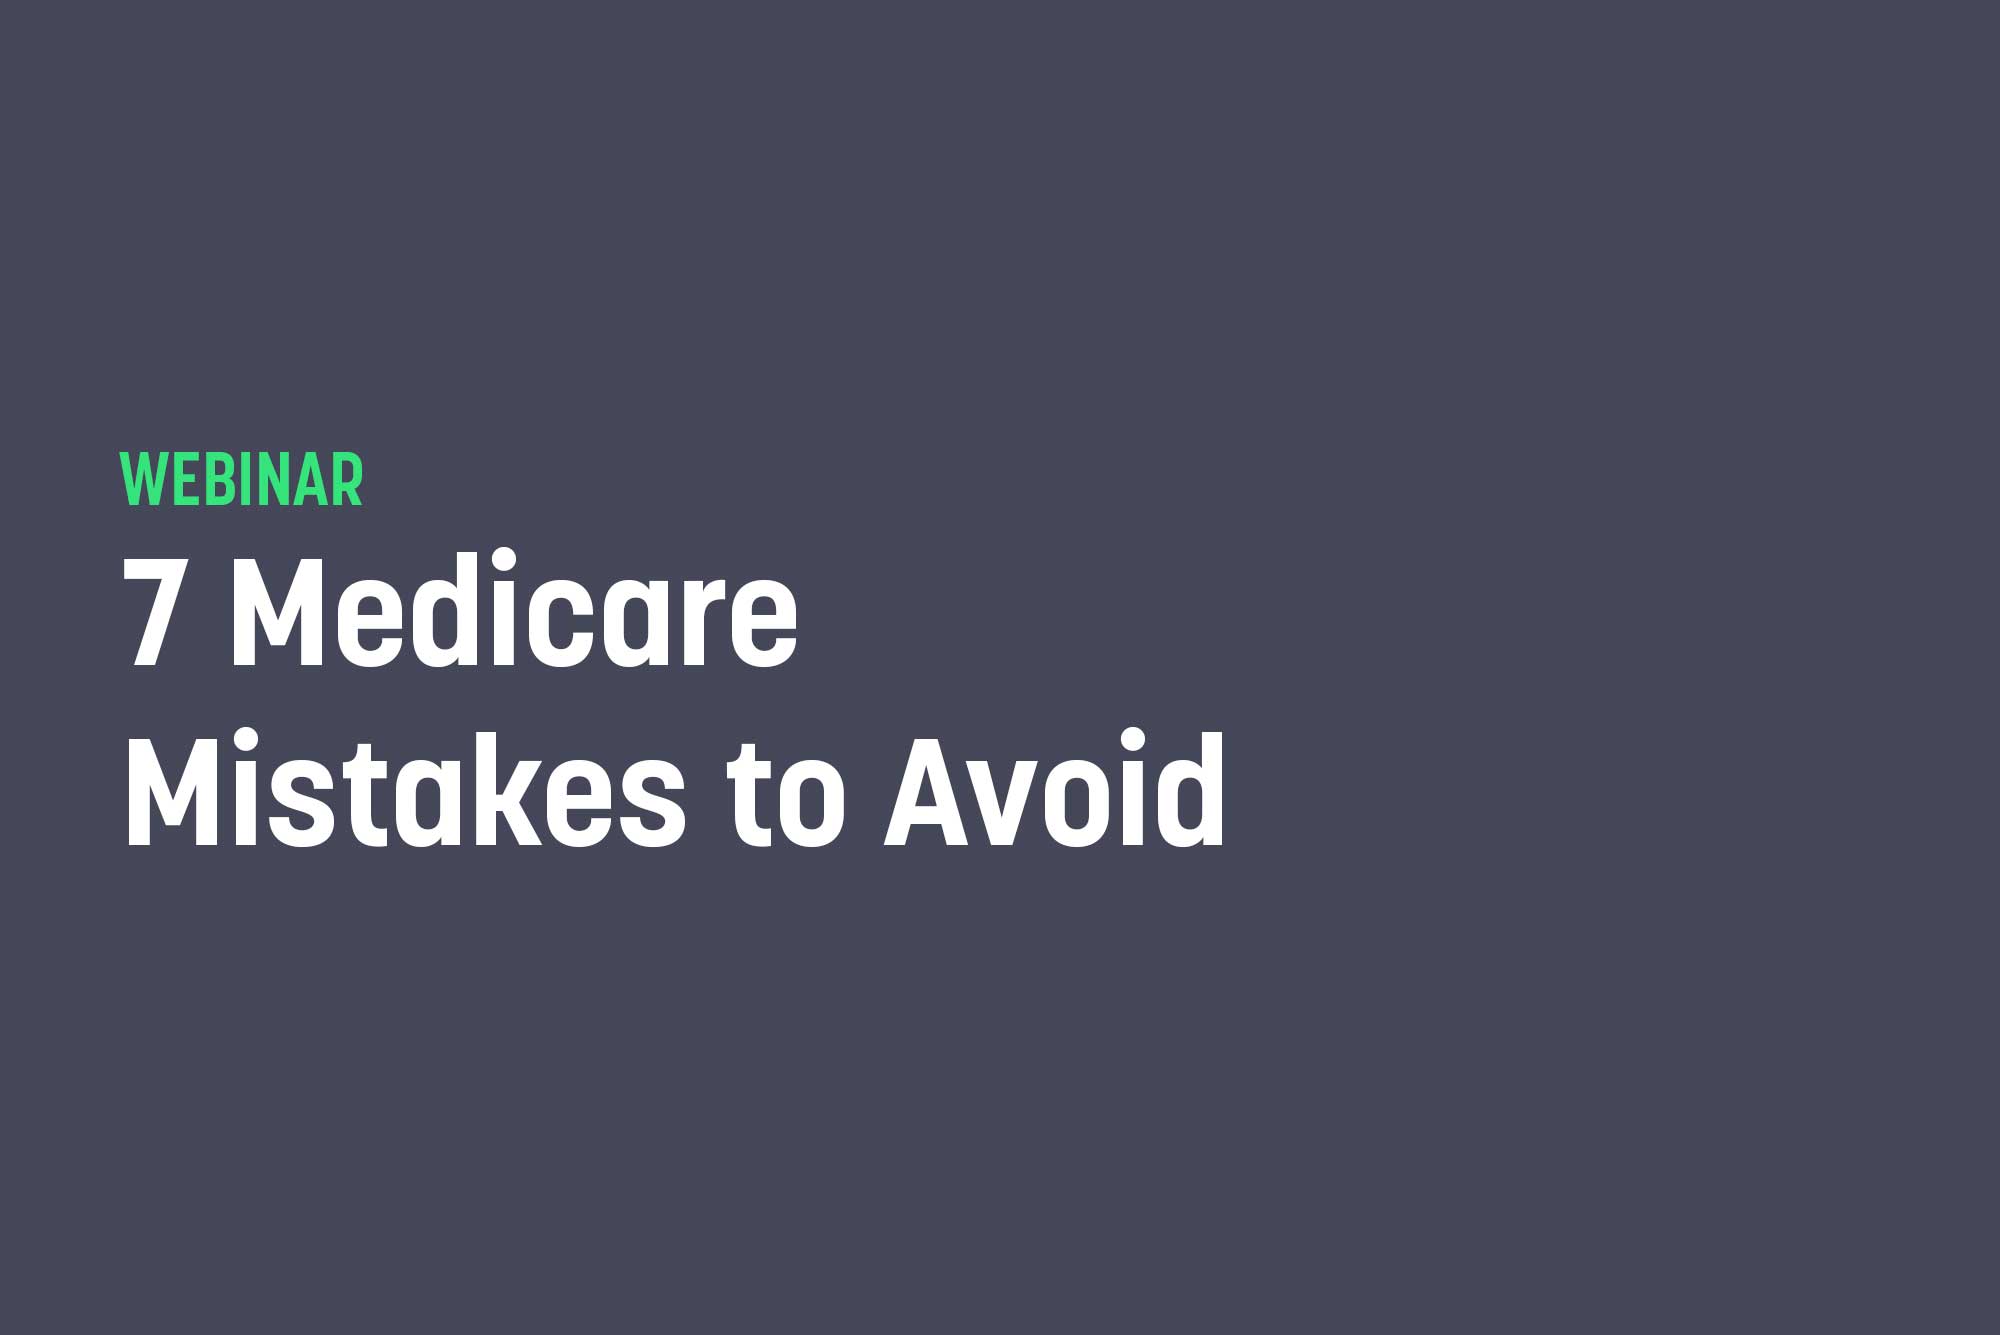 7 Medicare Mistakes to Avoid